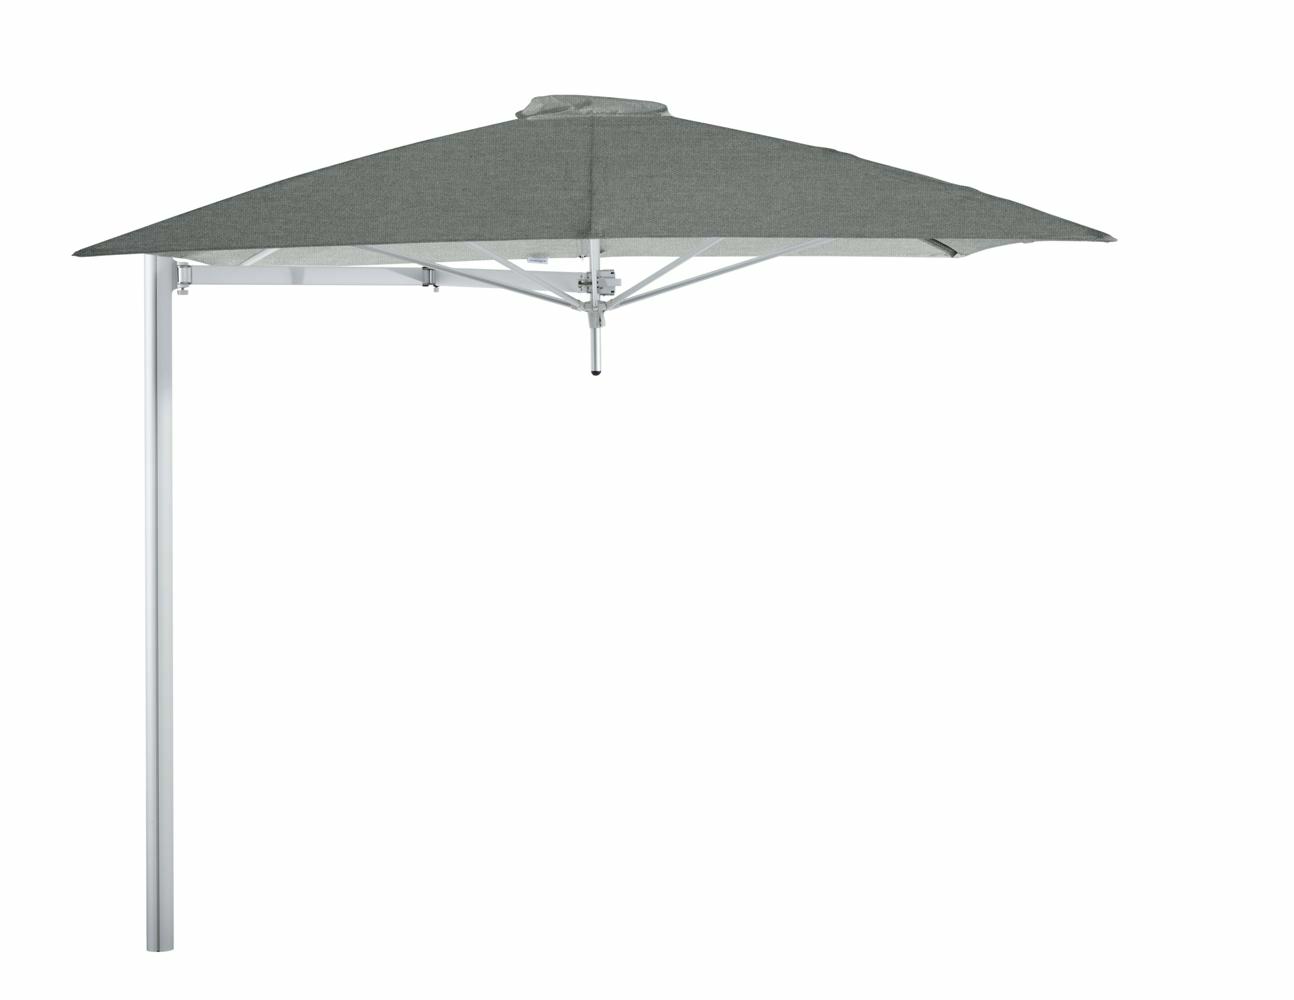 Paraflex cantilever umbrella square 2,3 m with Flanelle fabric and a Neo arm